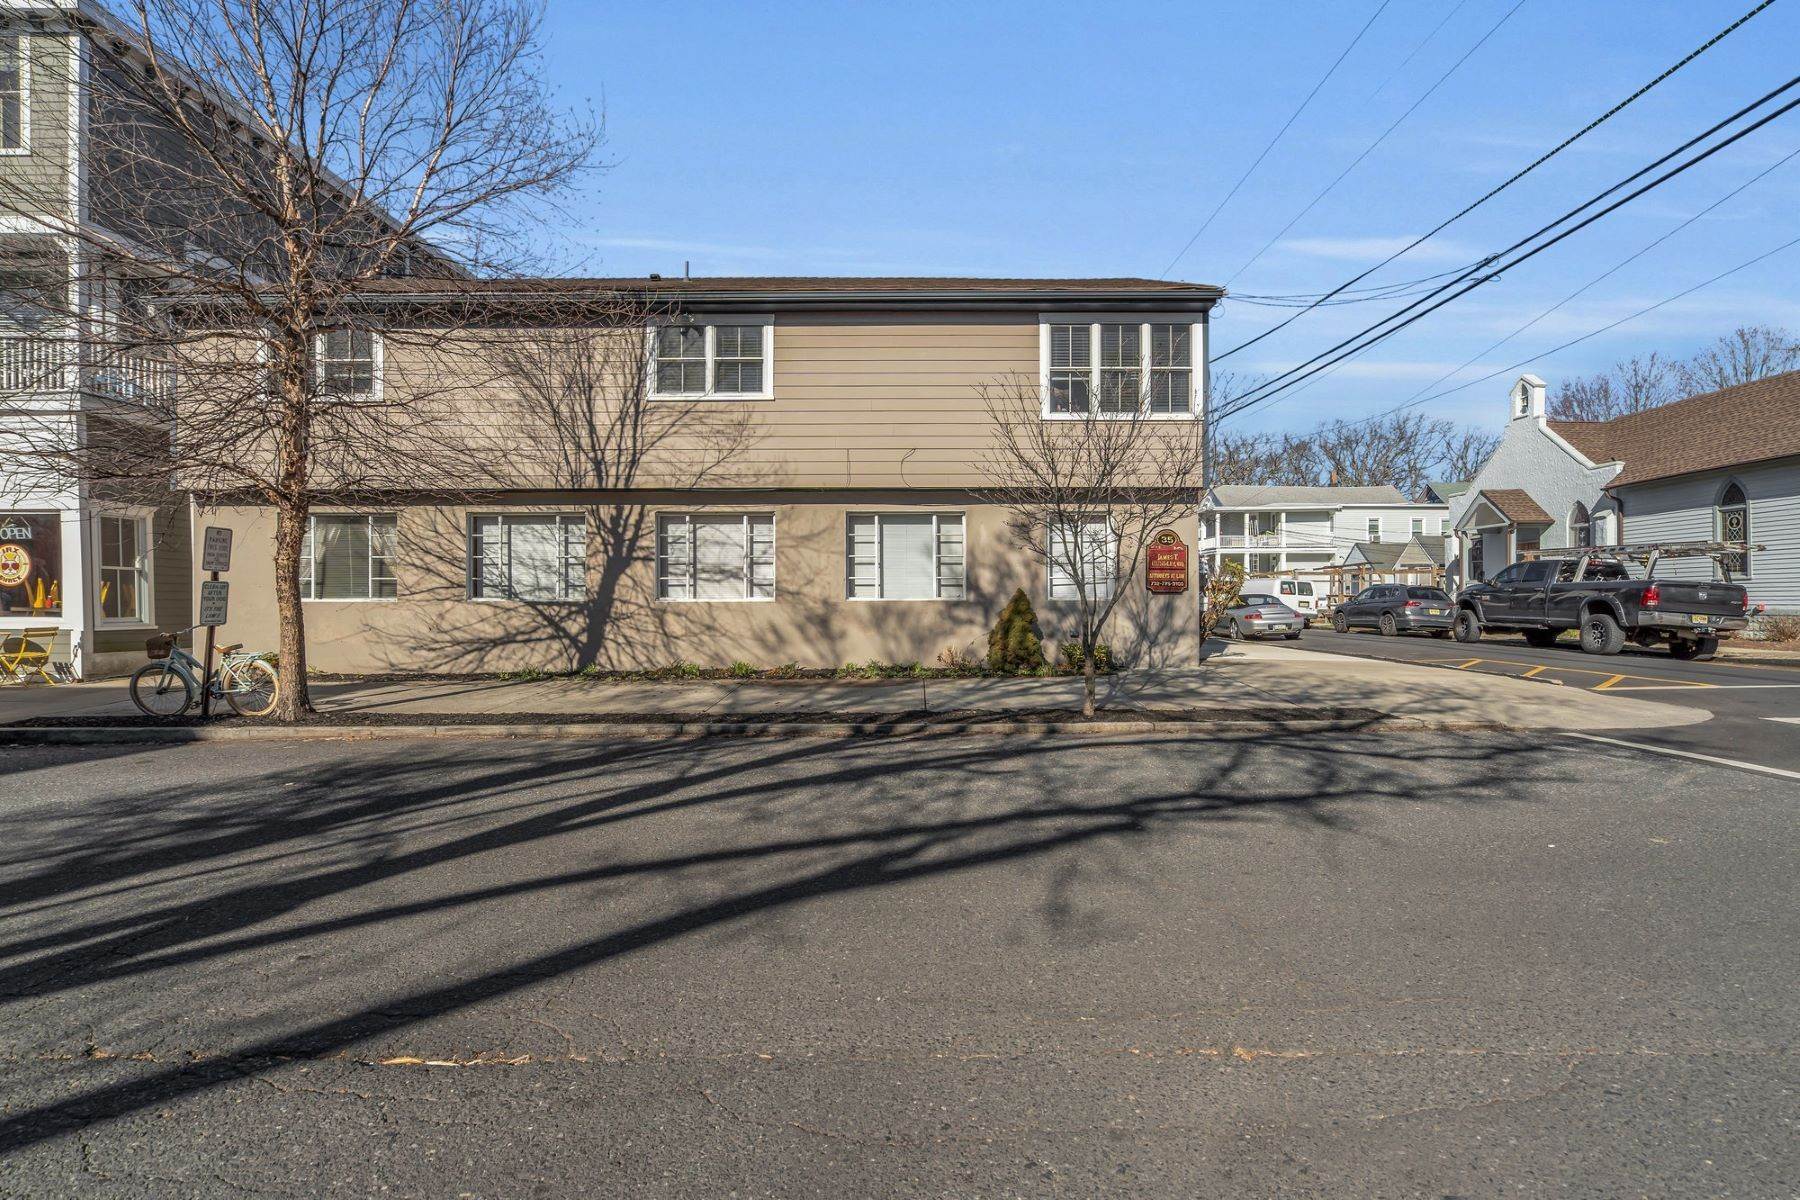 4. Property for Sale at Mixed Use Building 35 Pilgrim Pathway Neptune, New Jersey 07756 United States